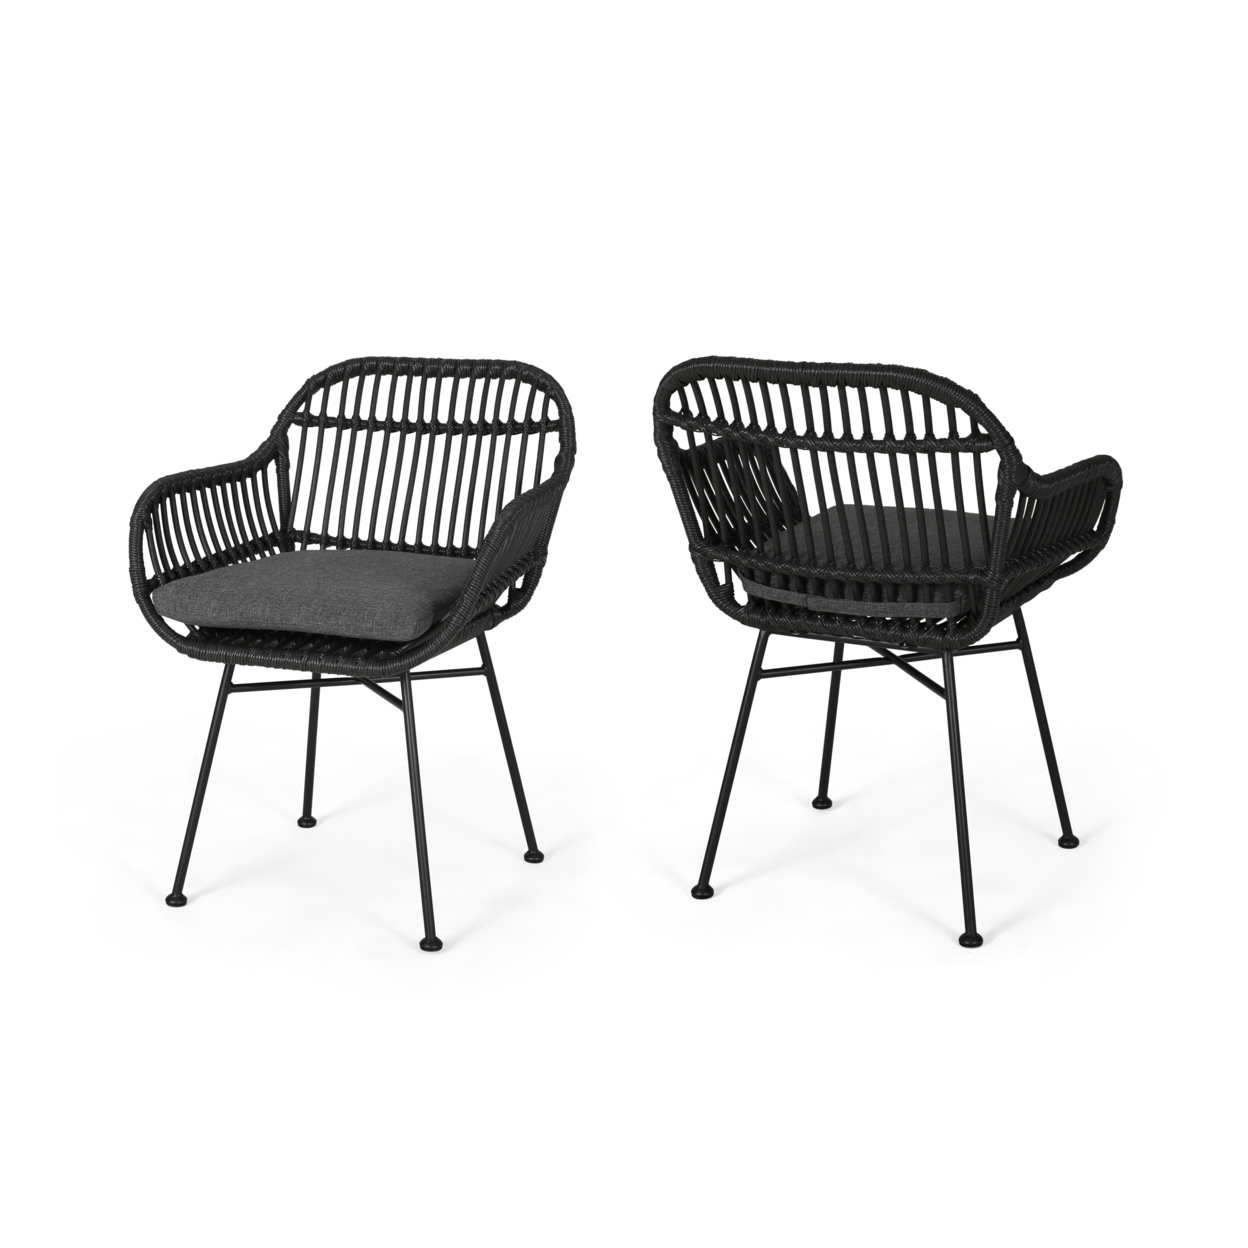 Rodney Indoor Woven Faux Rattan Chairs With Cushions (Set Of 2) - Gray + Dark Gray